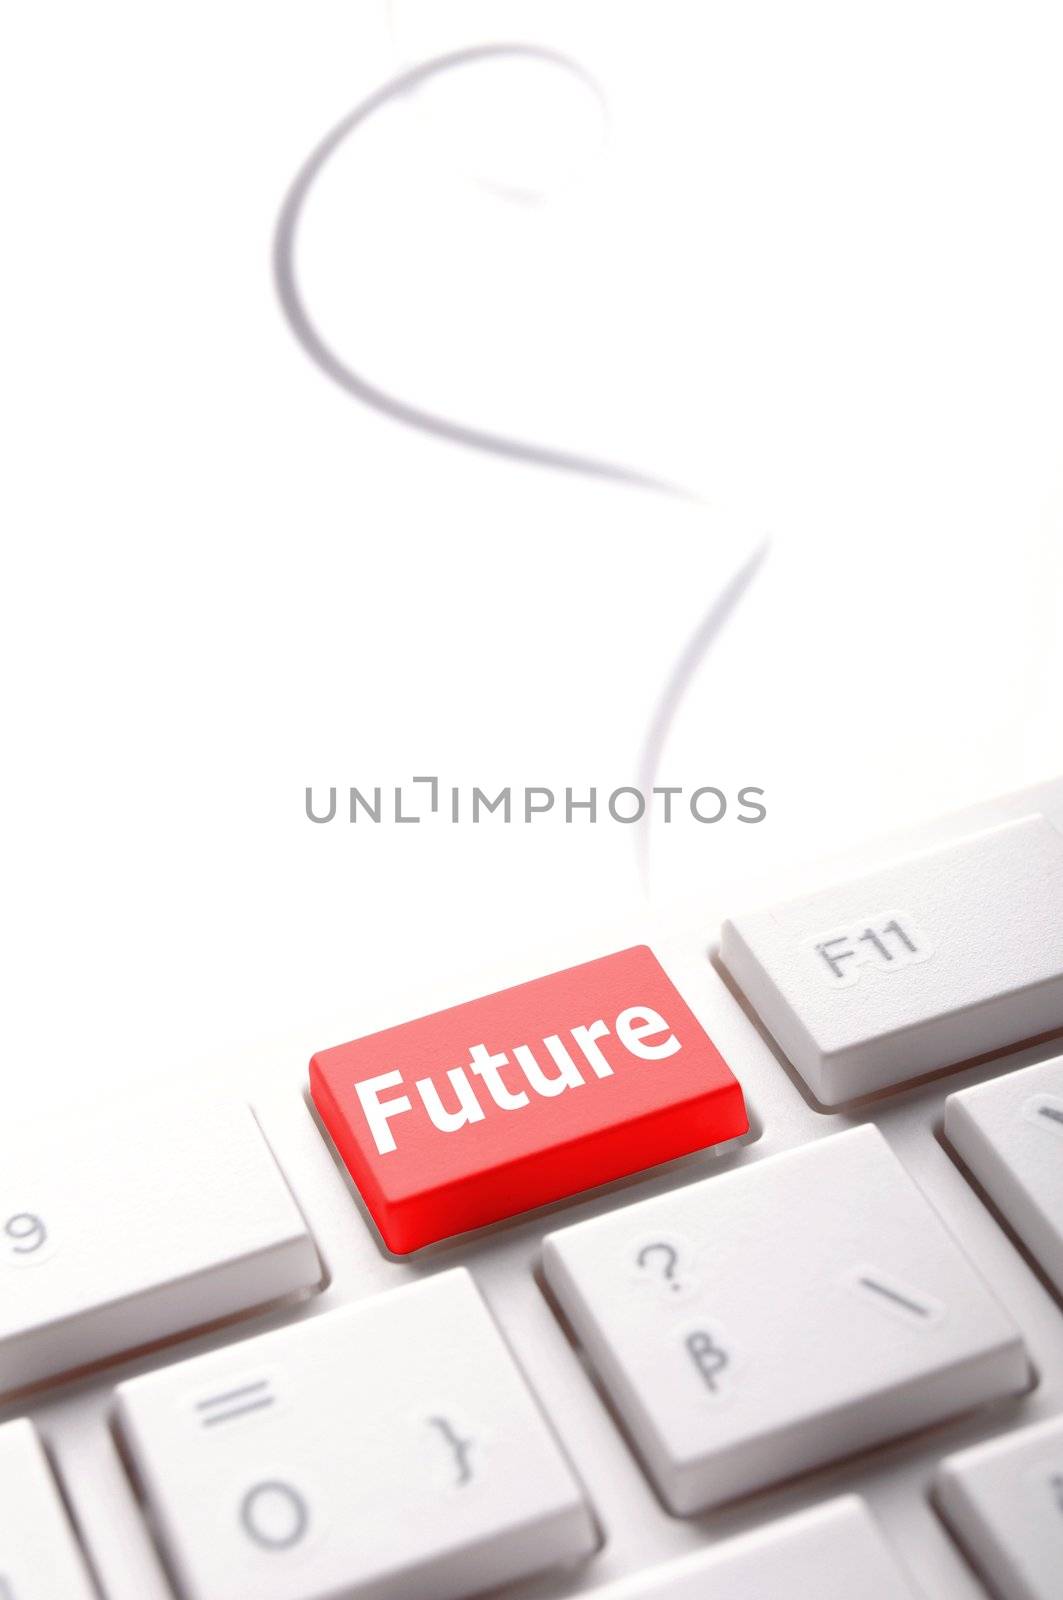 future key on keyboard showing time concept